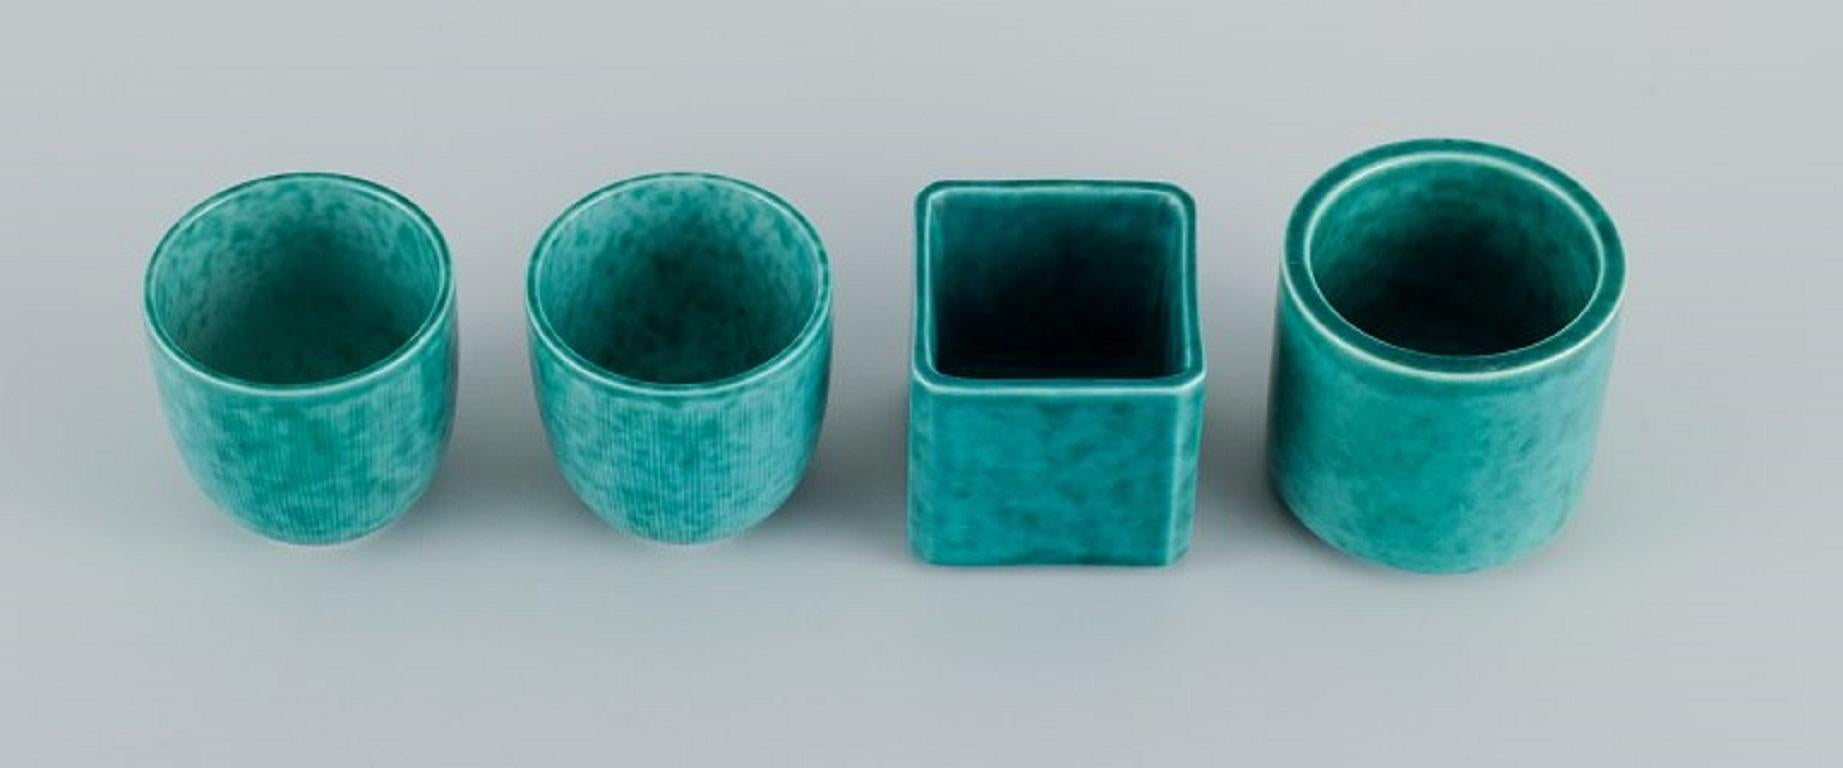 Wilhelm Kåge for Gustavsberg. Four Argenta Art Deco vases in glazed ceramics. 
Beautiful glaze in shades of green. Mid-20th C.
Largest measuring: H 6,0 x D 6,0 cm.
In excellent condition.
Unmarked.